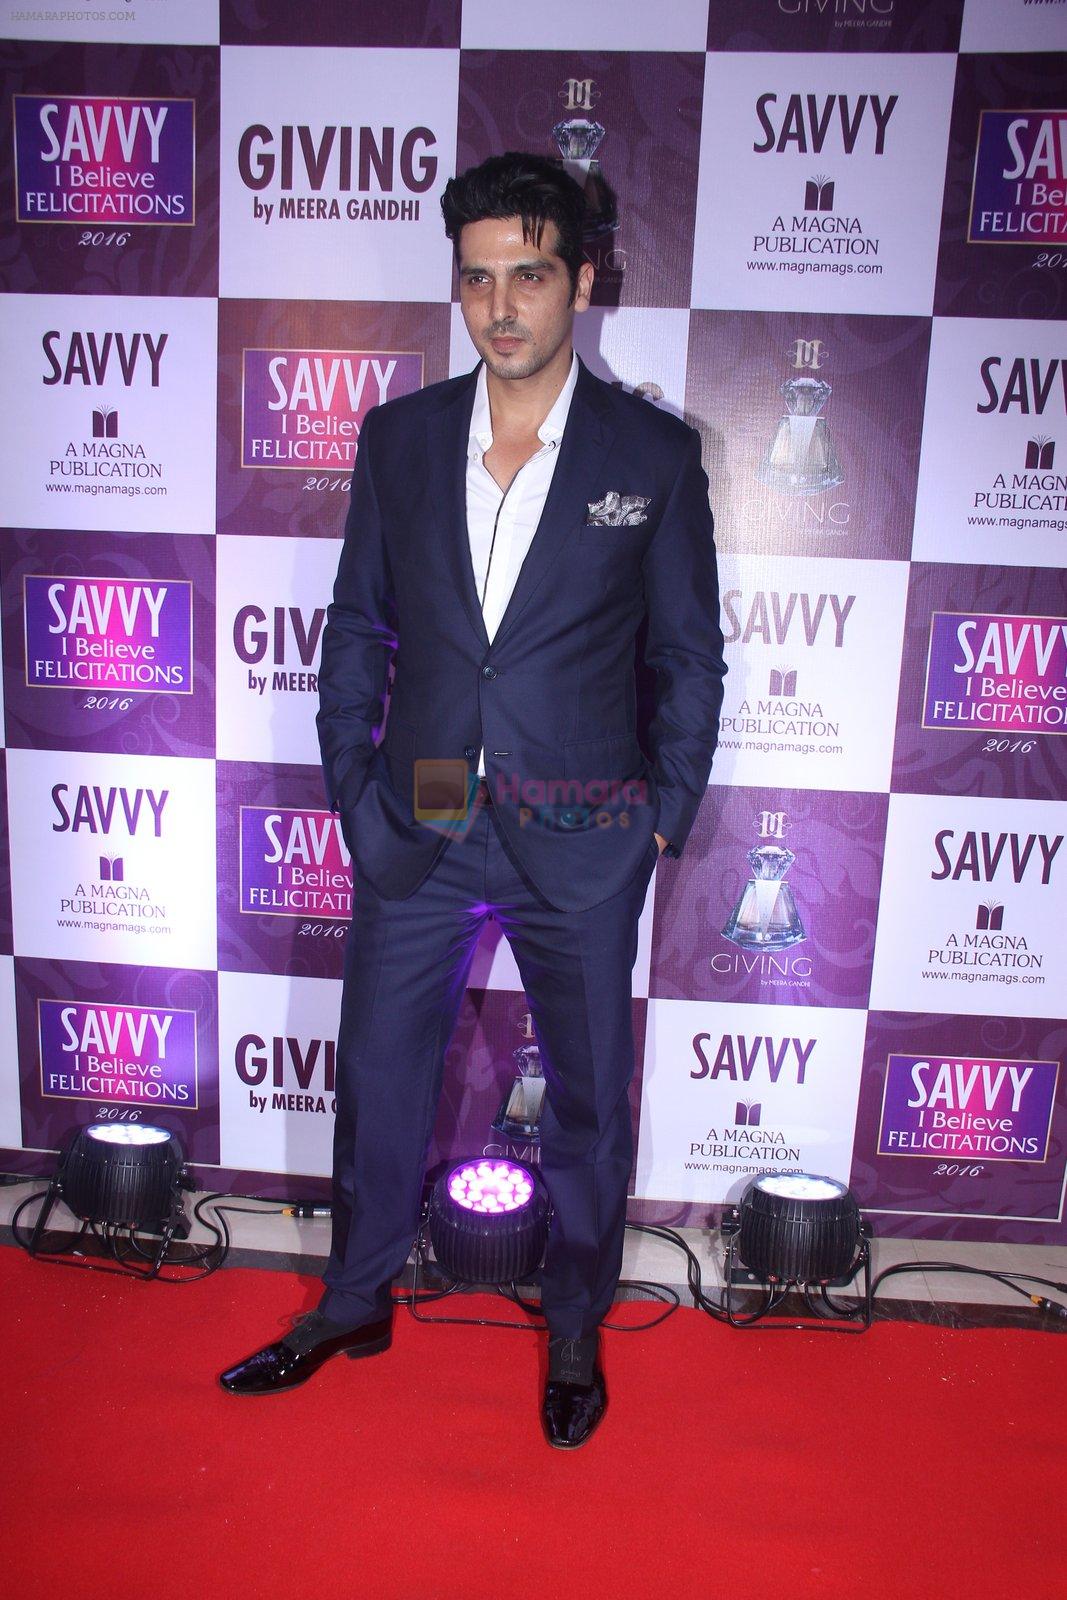 Zayed Khan at Savvy Magazine covers celebrations in Mumbai on 9th April 2016